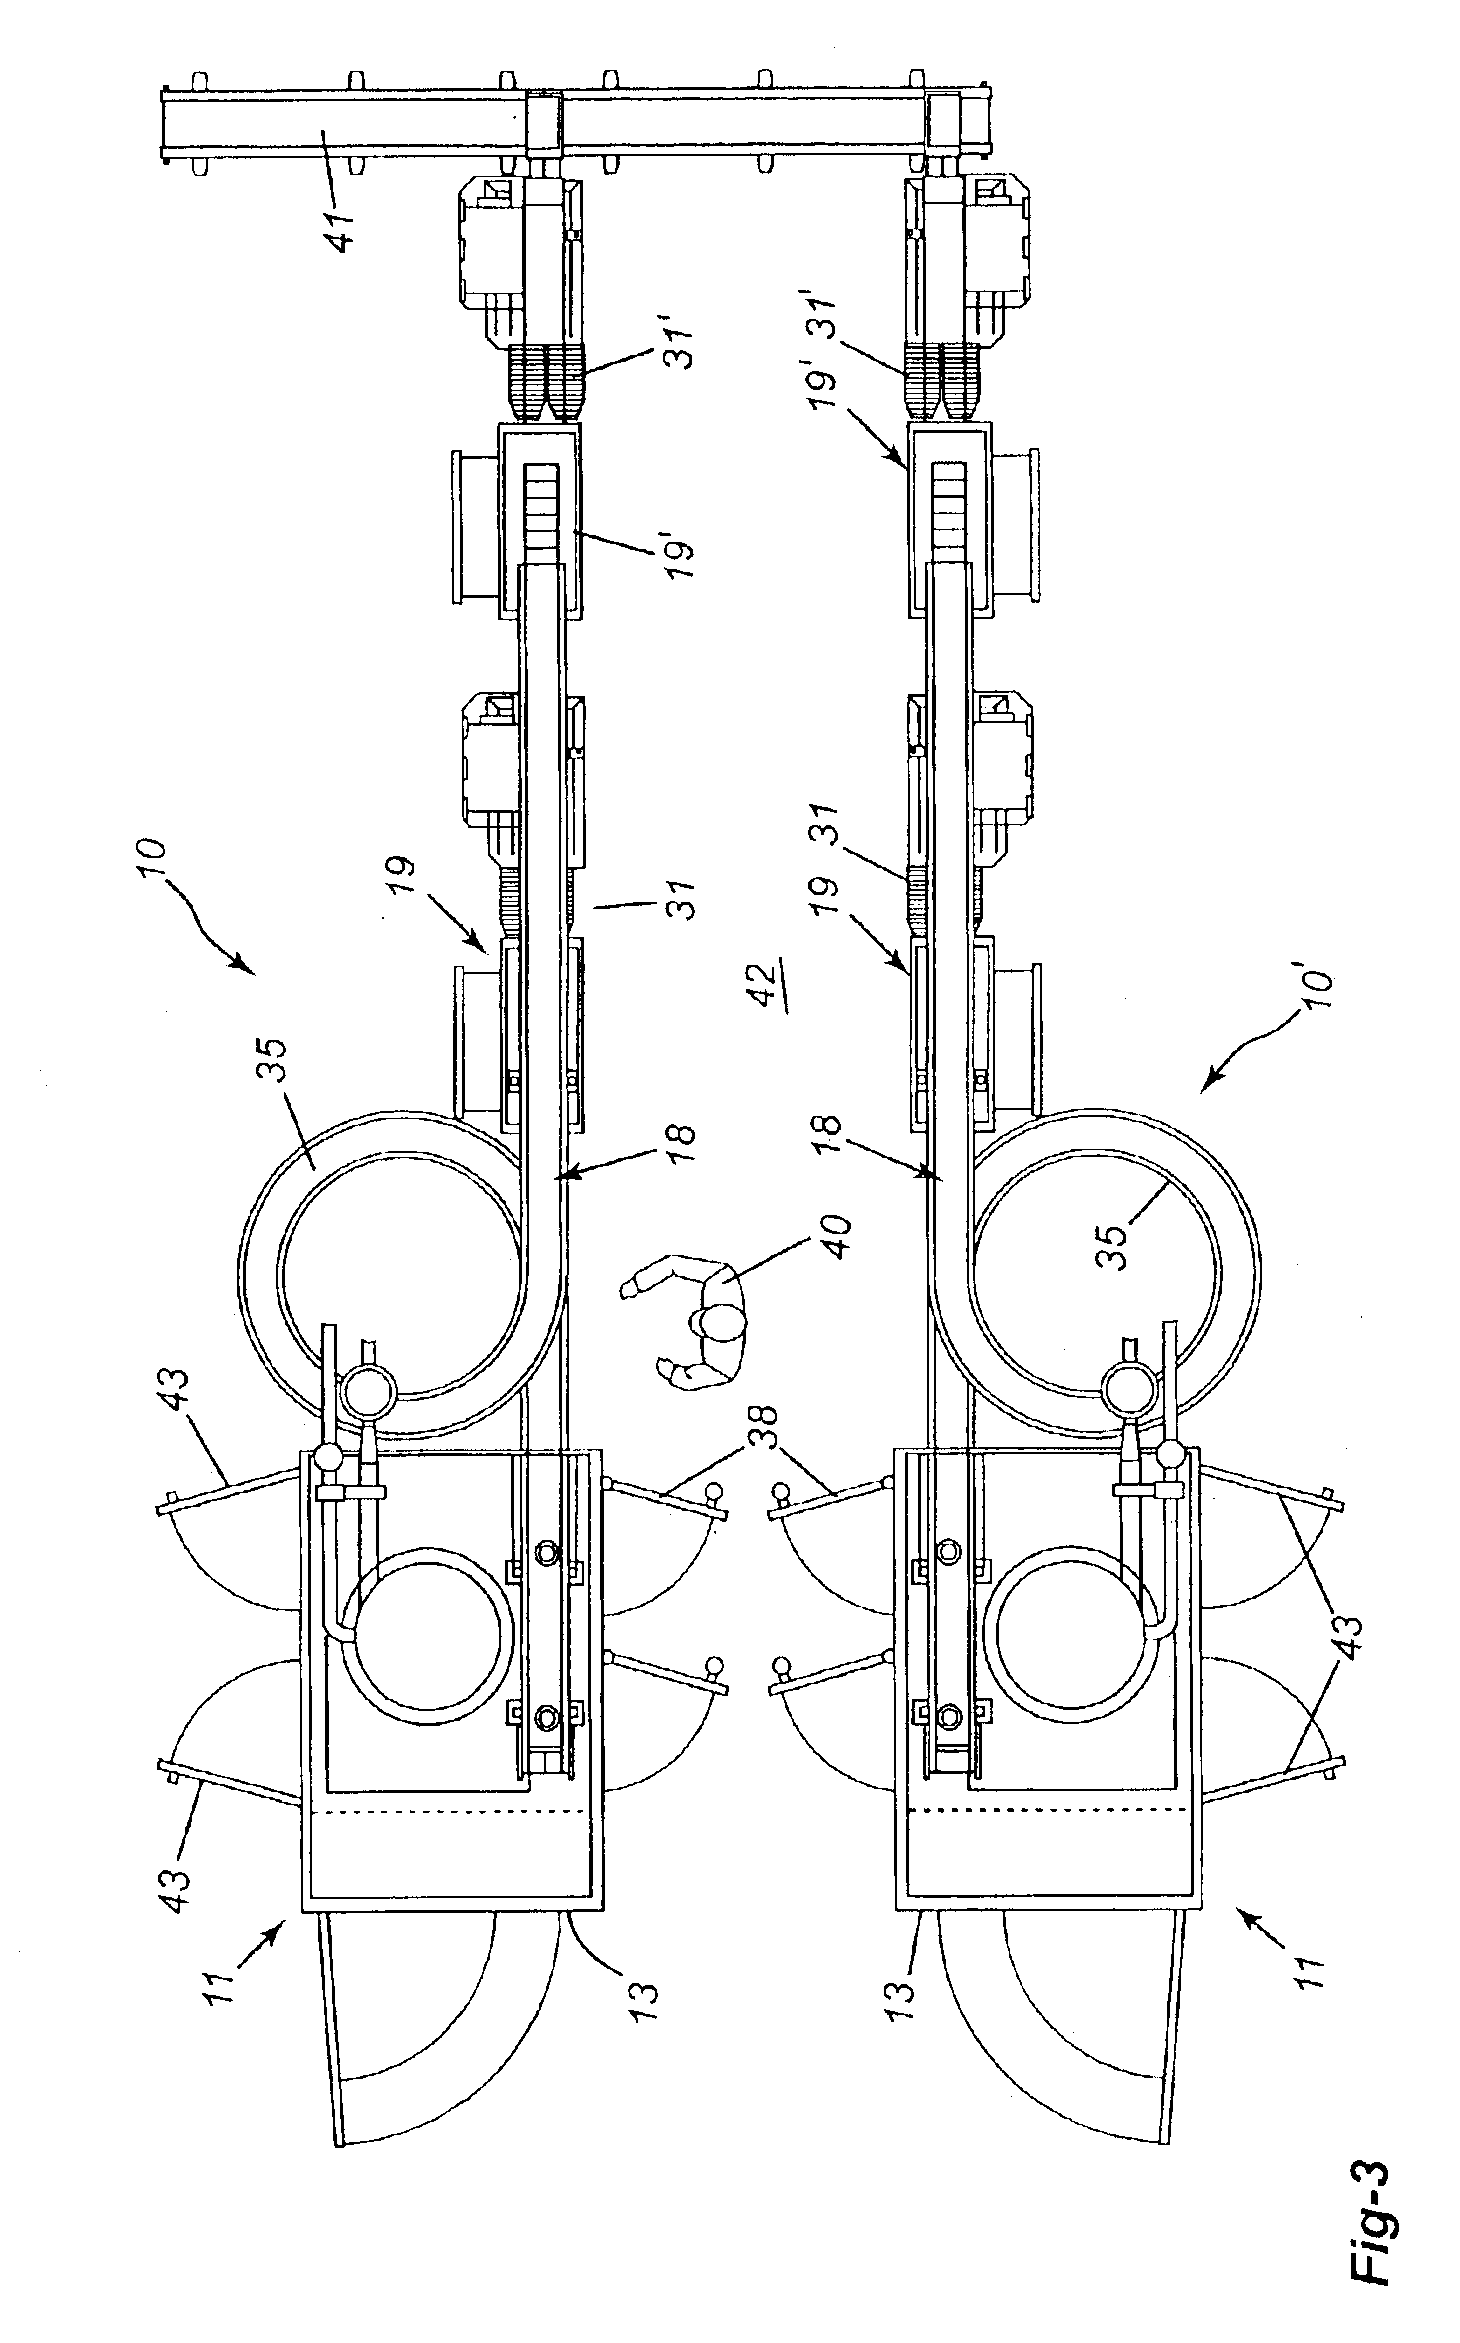 High speed bagging system and method